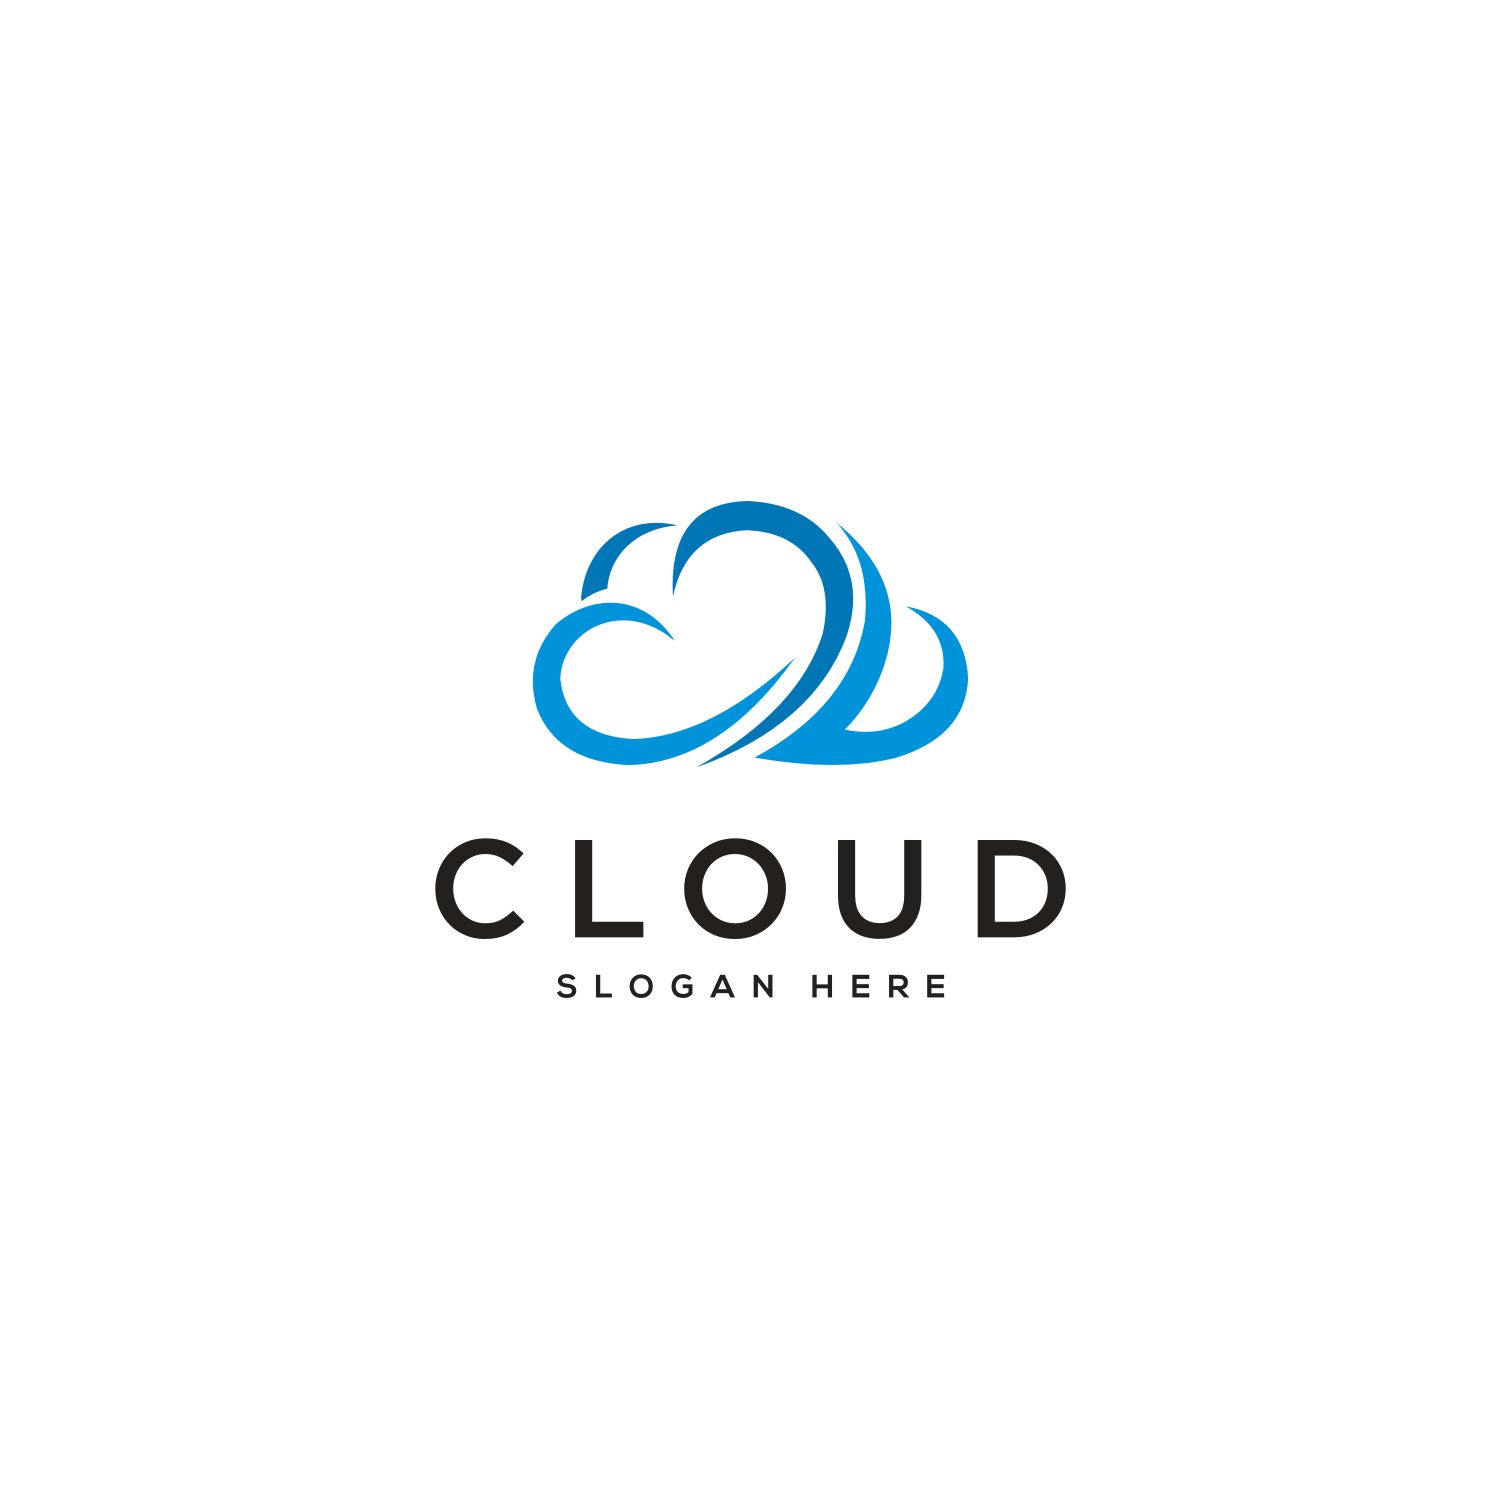 Abstract Cloud Logo Template cover image.